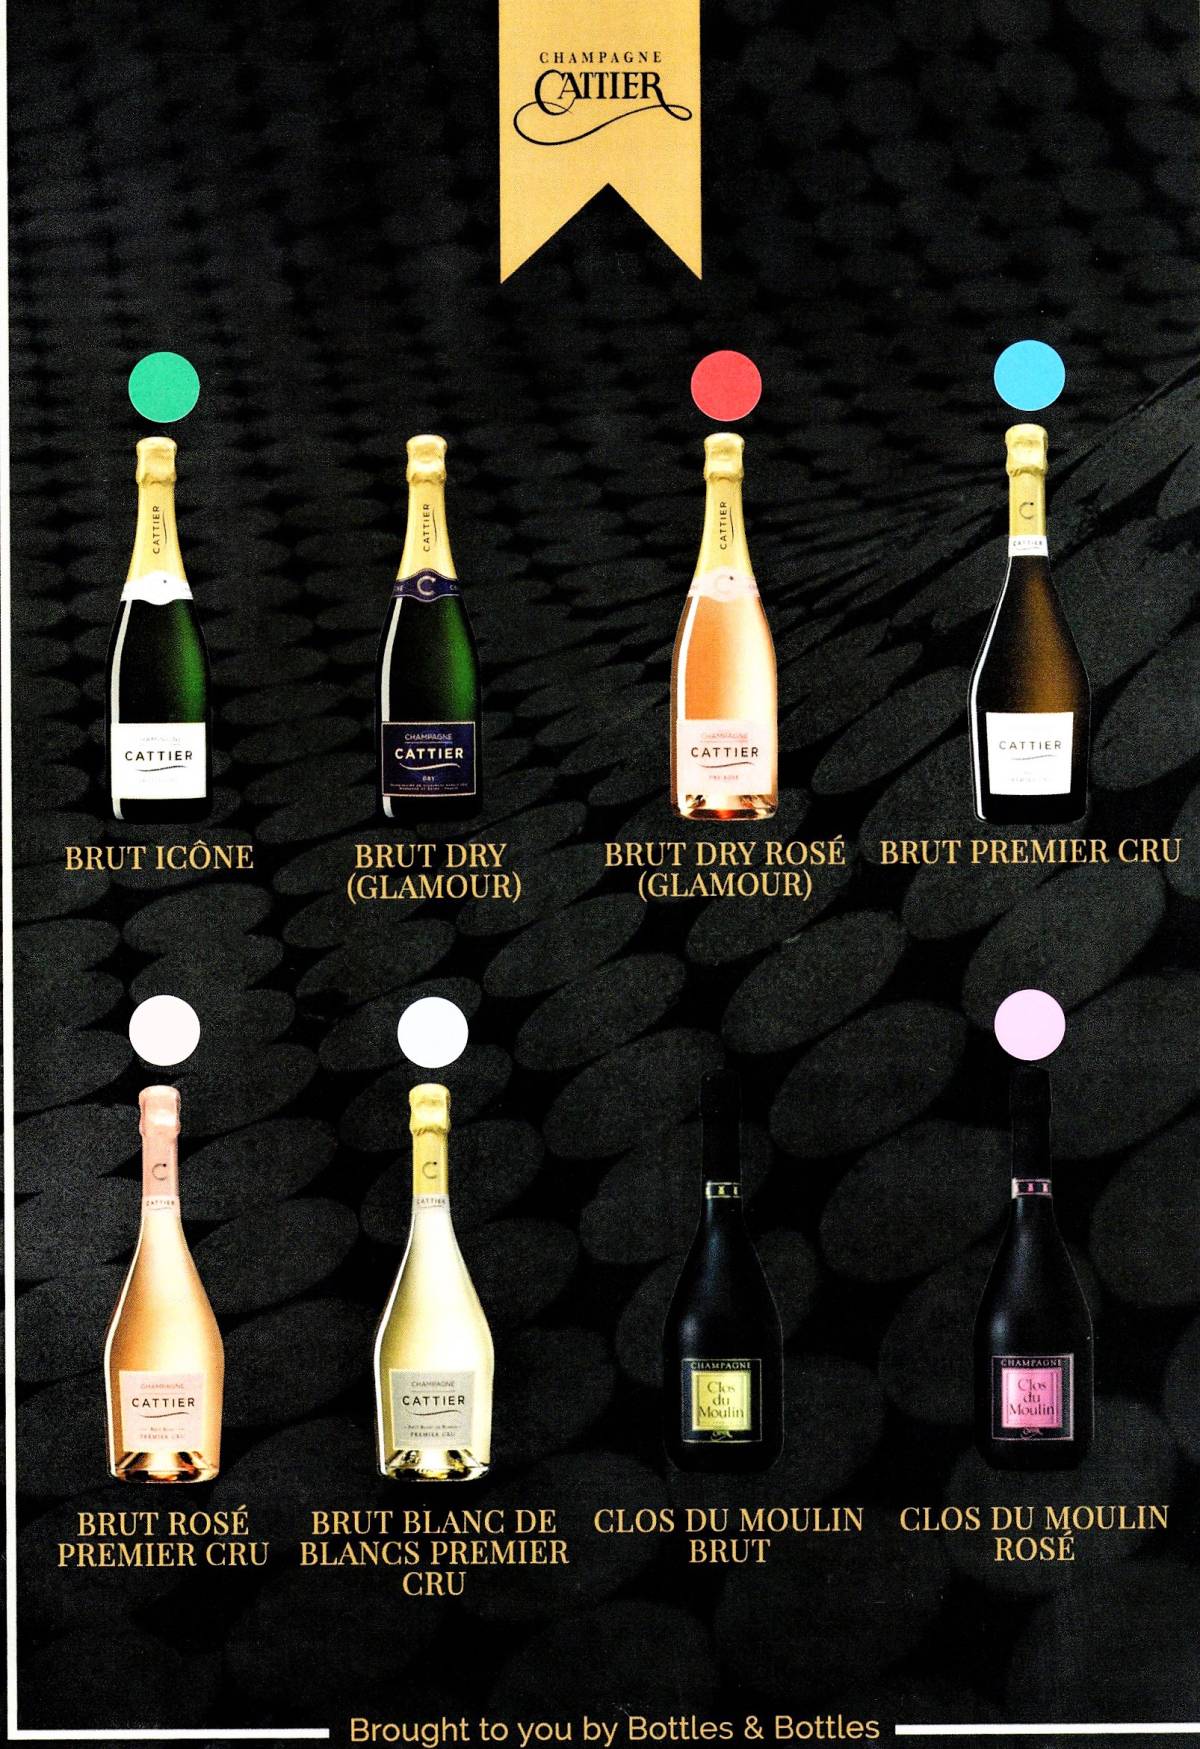 Champagne Cattier Appoints Bottles and Bottles as Exclusive Distributor in Singapore